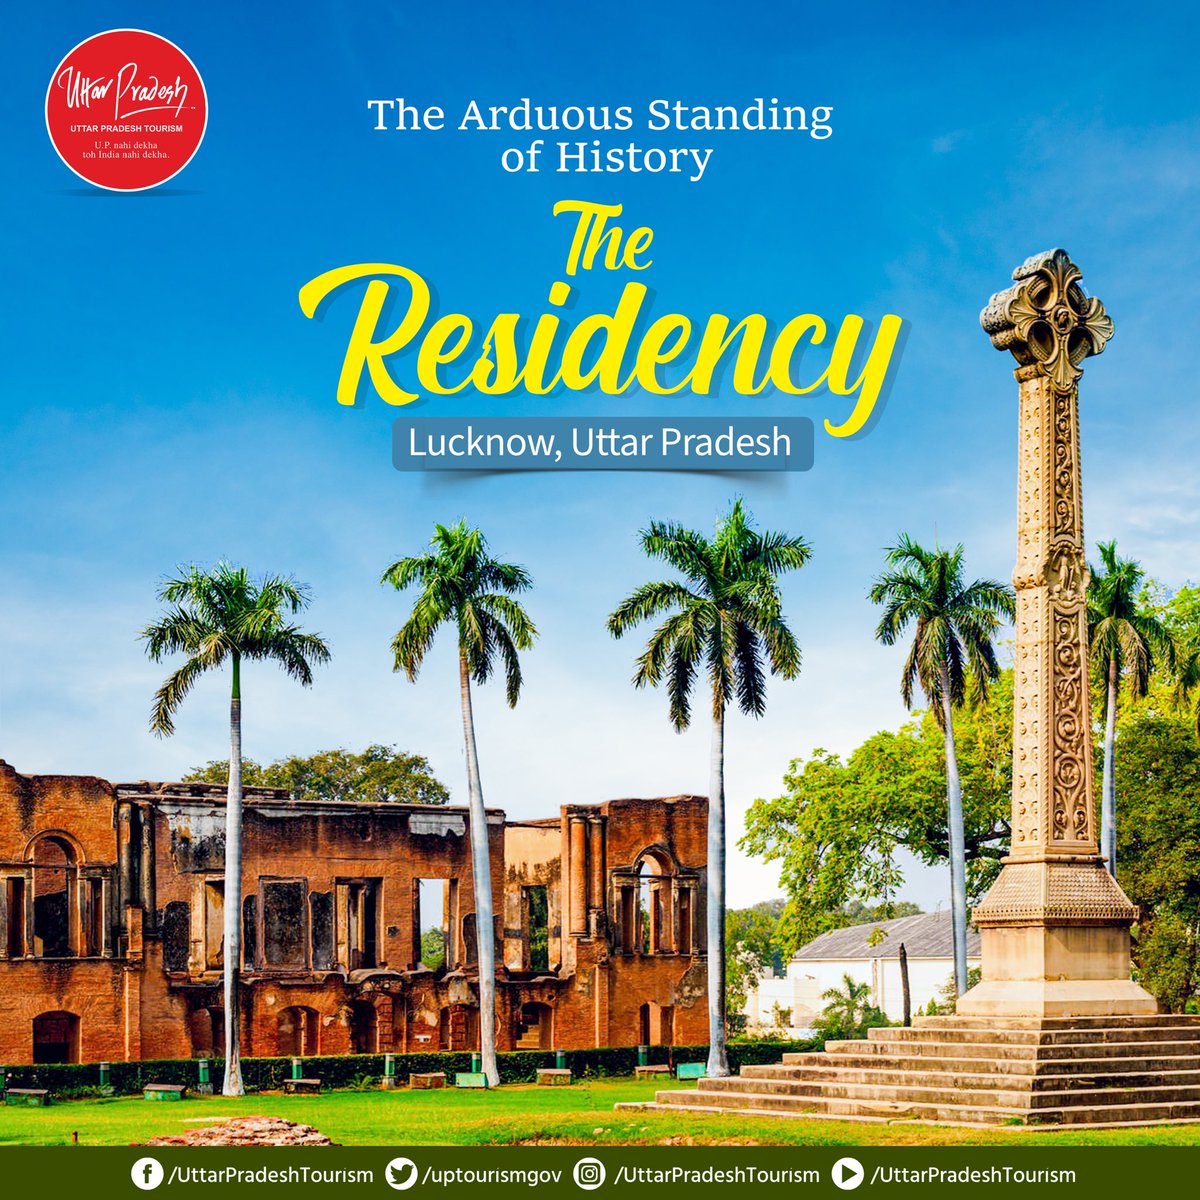 Let's journey back in time and relive history at #TheResidency! Explore a fascinating collection of structures including armoury, barracks, stables & more. Marvel at the stunning Banquet Hall adorned with intricate carvings, soaring arches &spacious passageways. #WorldHeritageDay